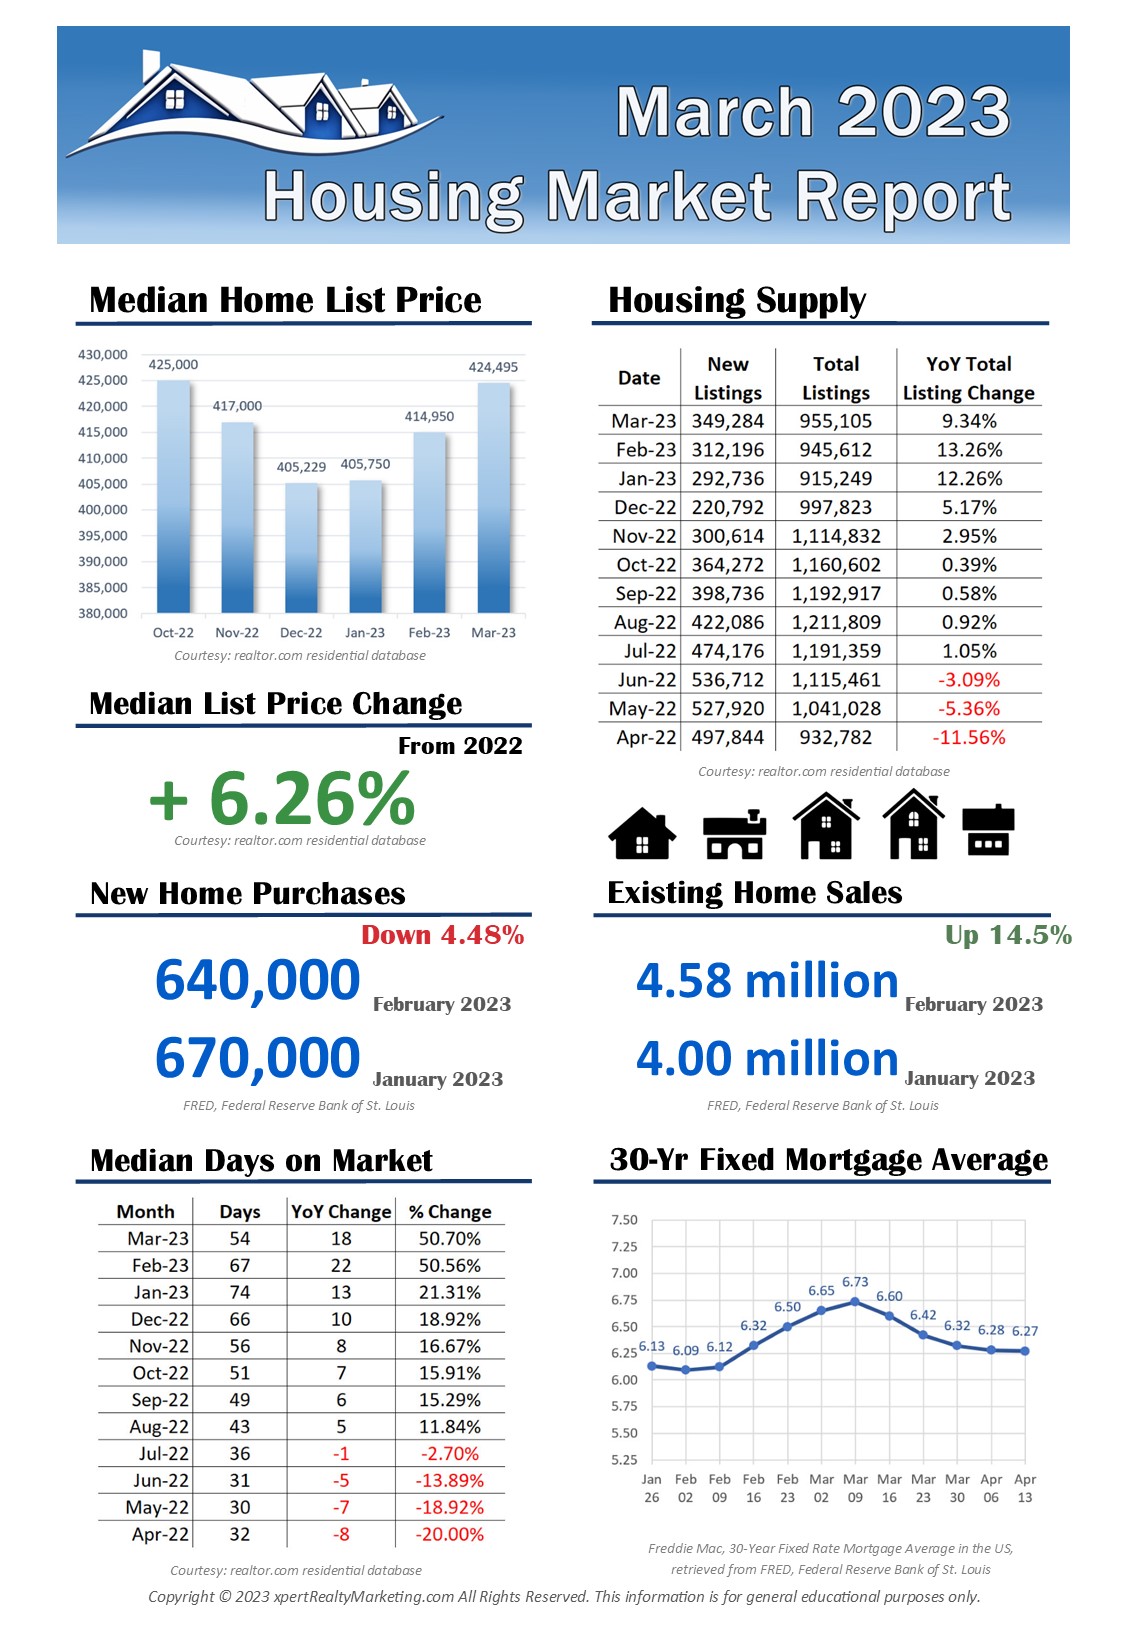 March 2023 U.S. Housing Market Report Infographic